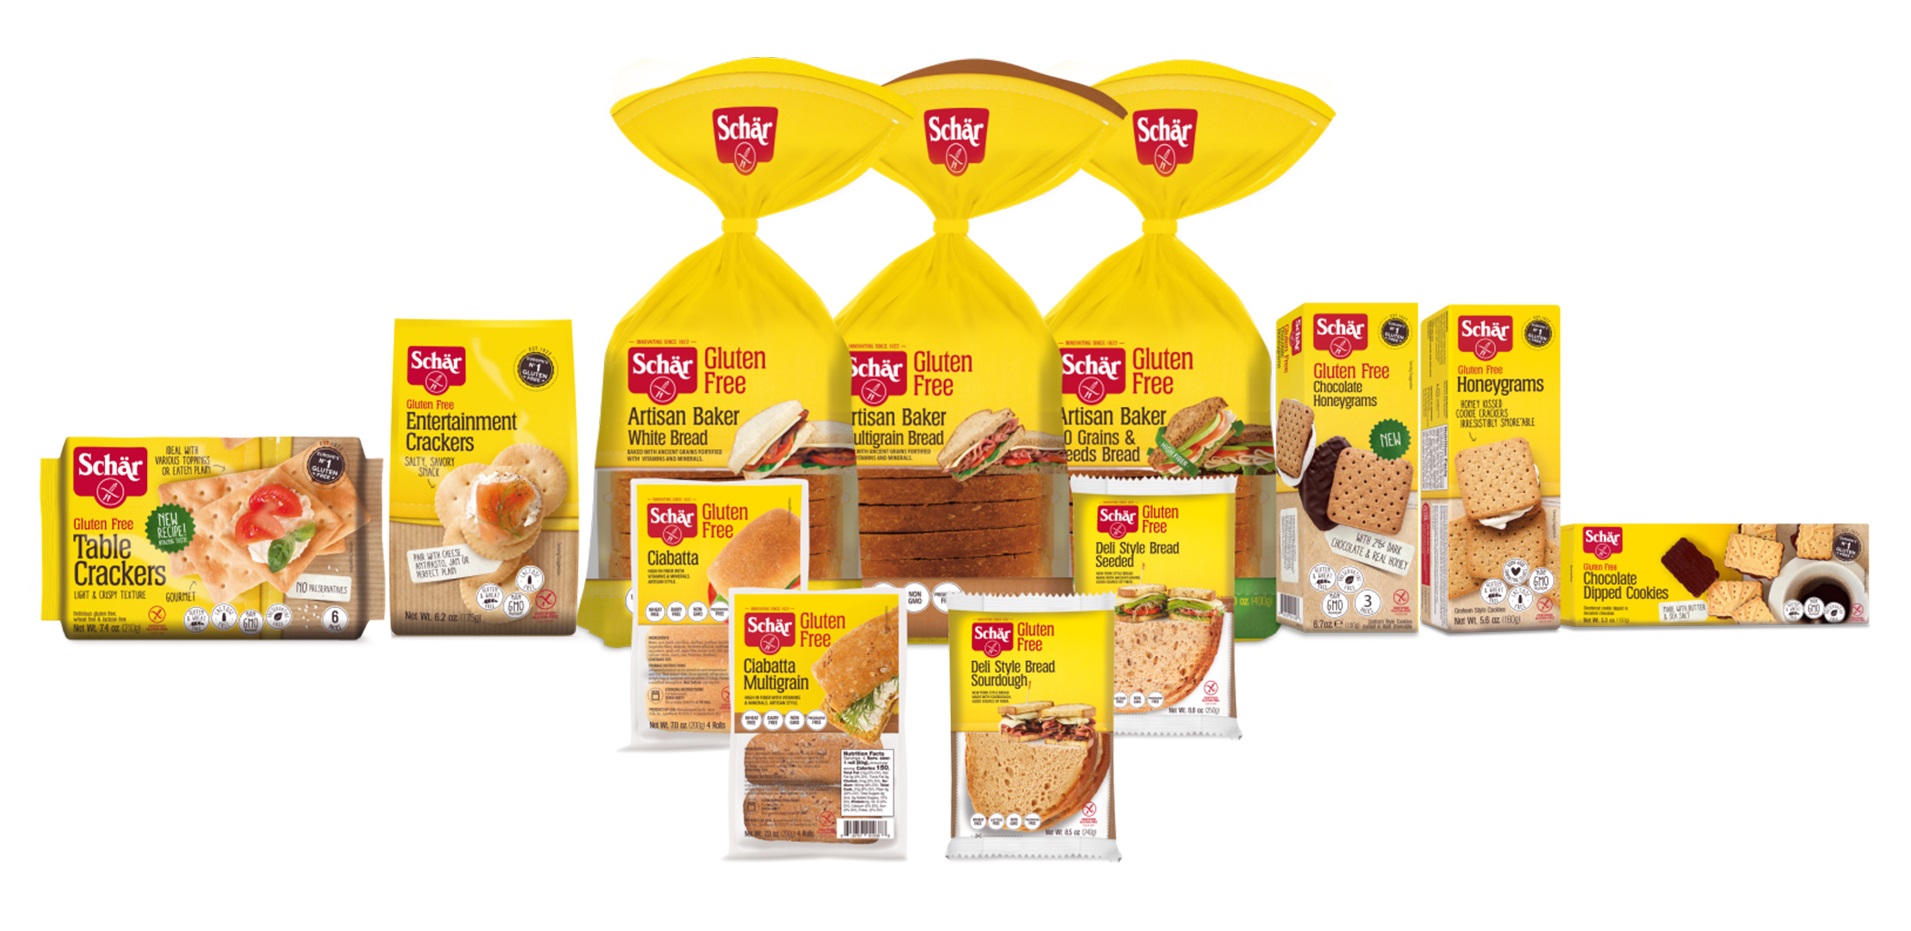 Image of Schär Food Products